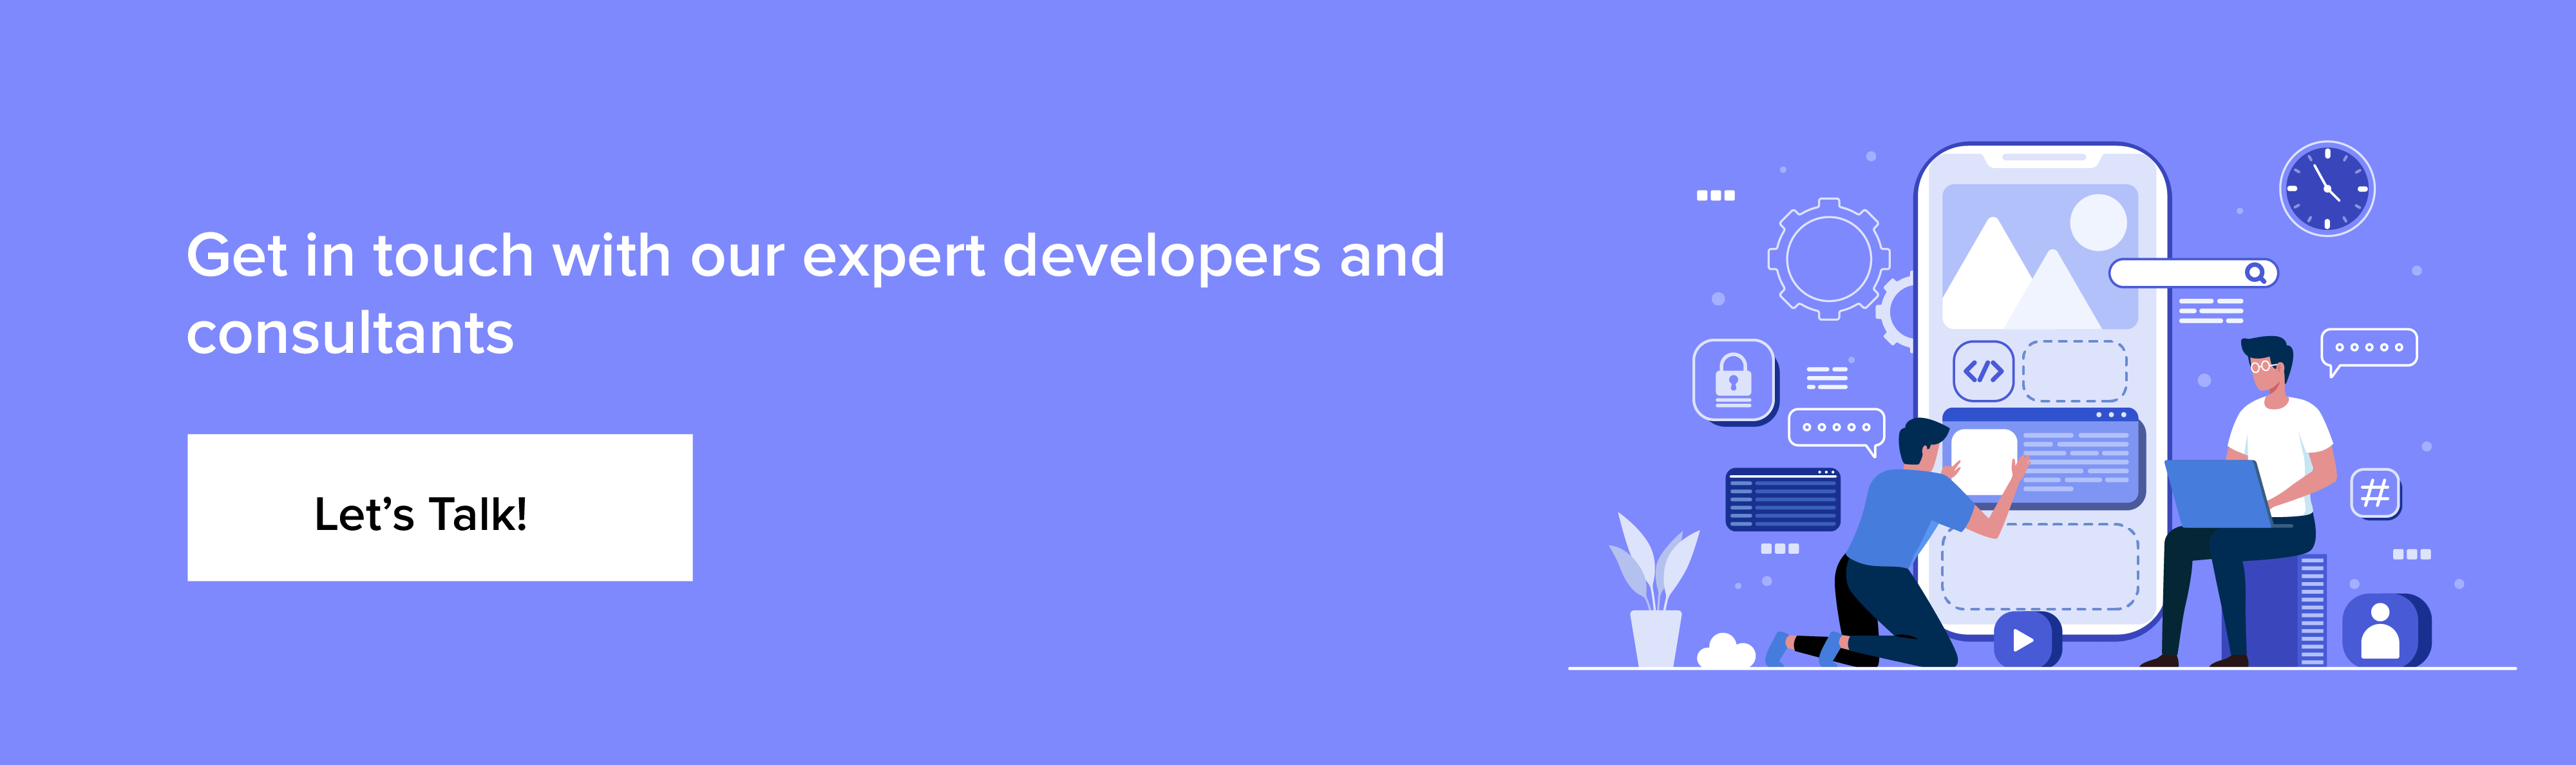 contact our expert developers